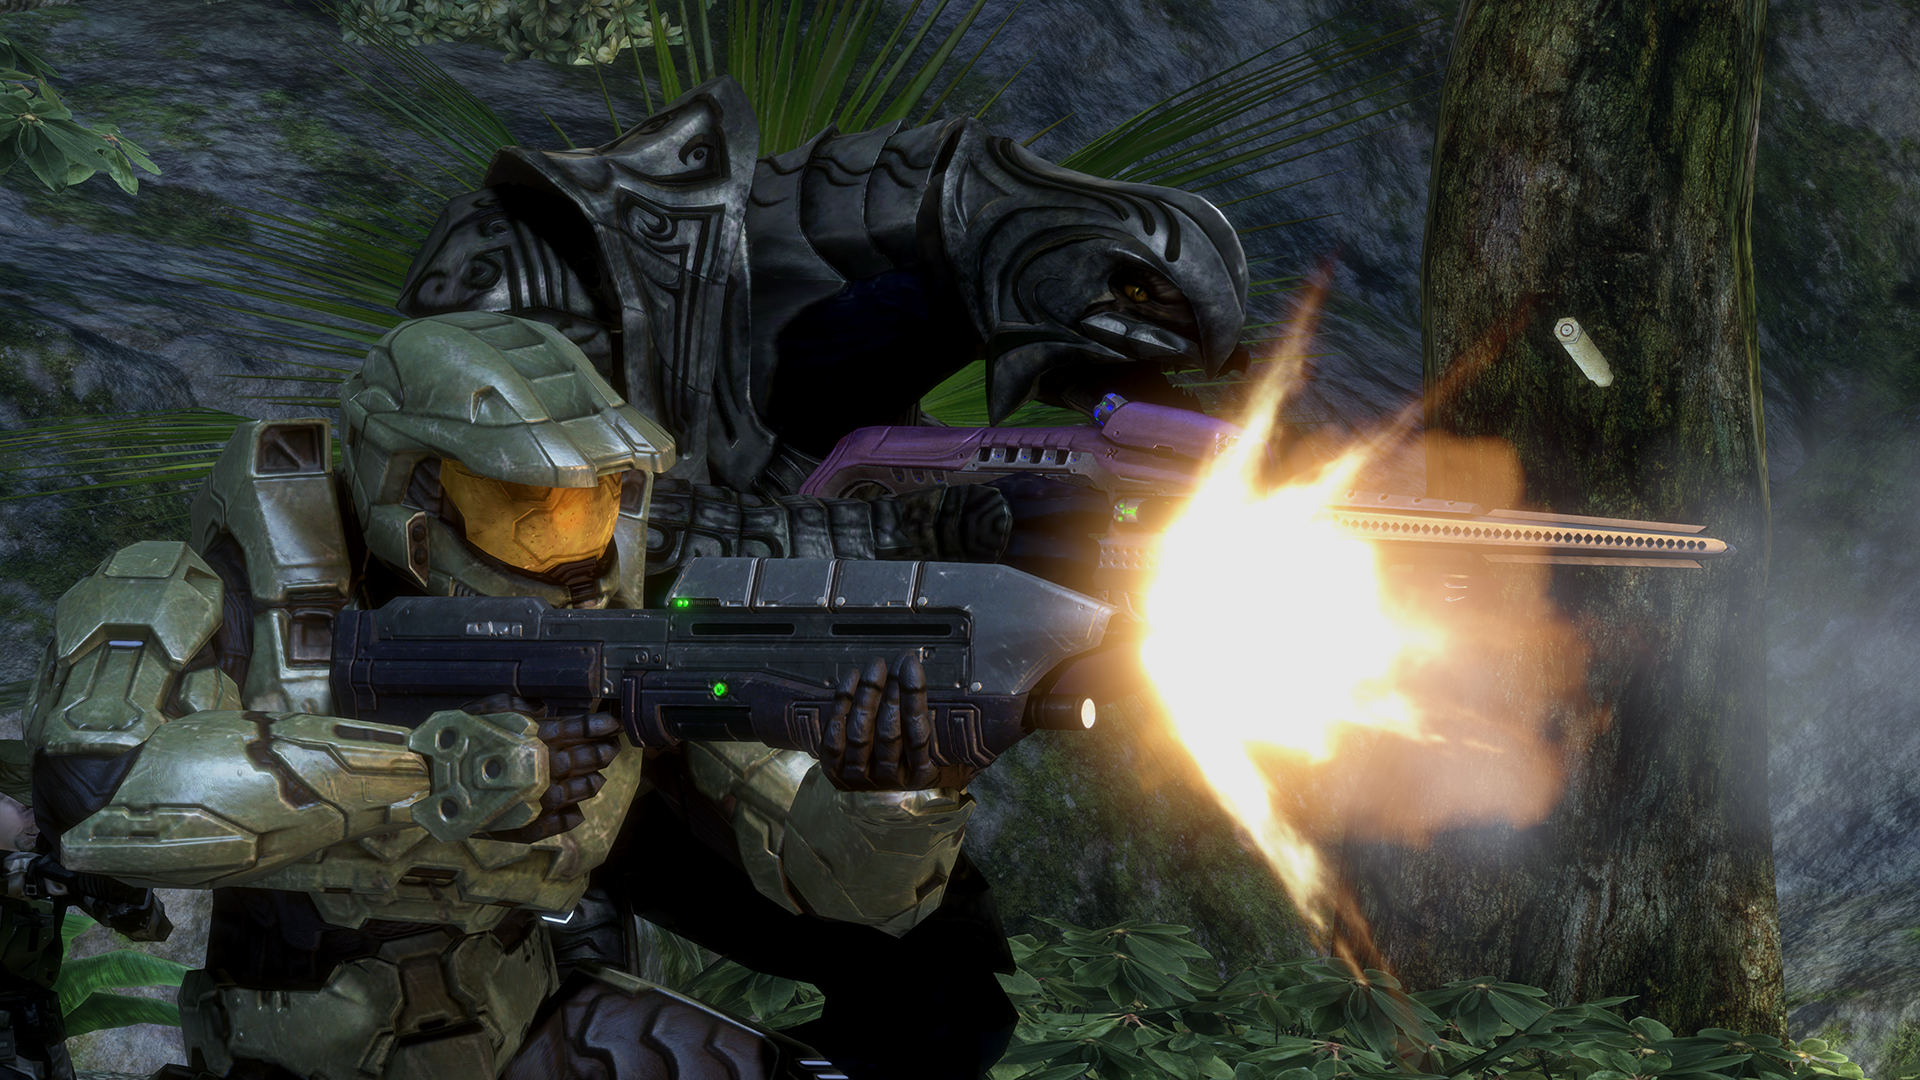 Finish The Fight In Halo 3 Now Available For Pc With The Master Chief Collection Xbox Wire